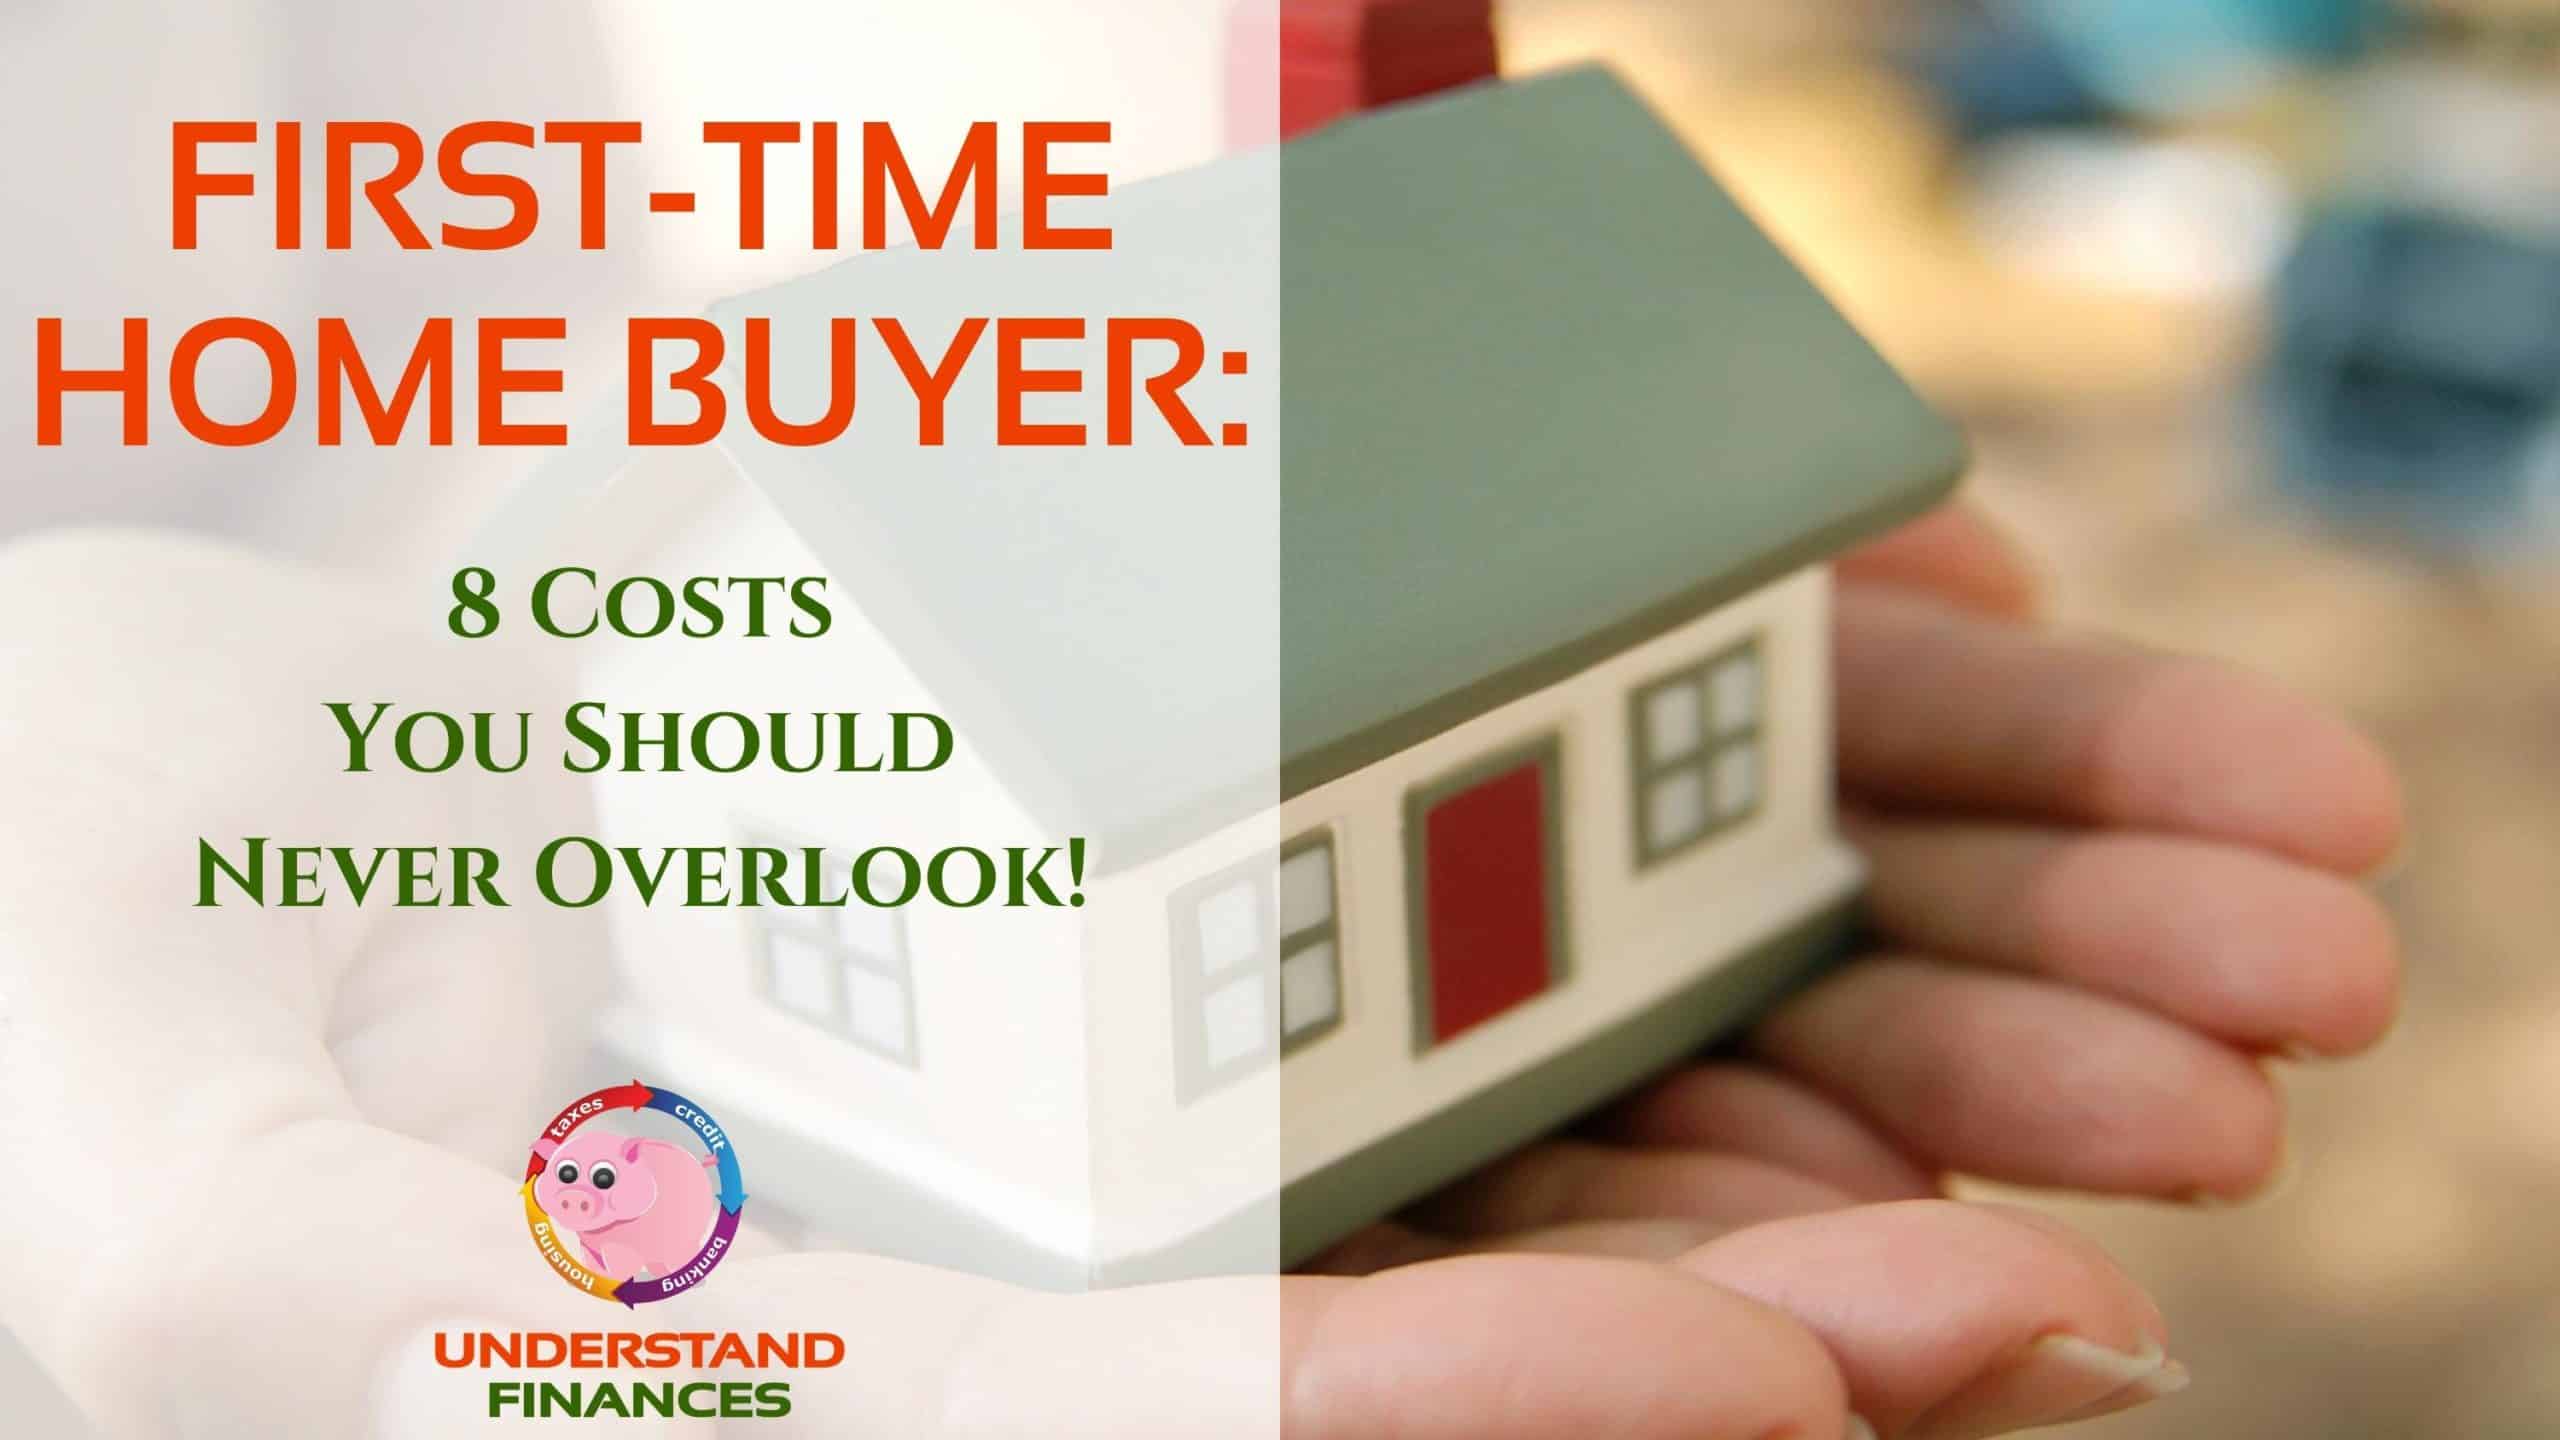 First-Time Home Buyer: 8 Costs You Should Never Overlook!